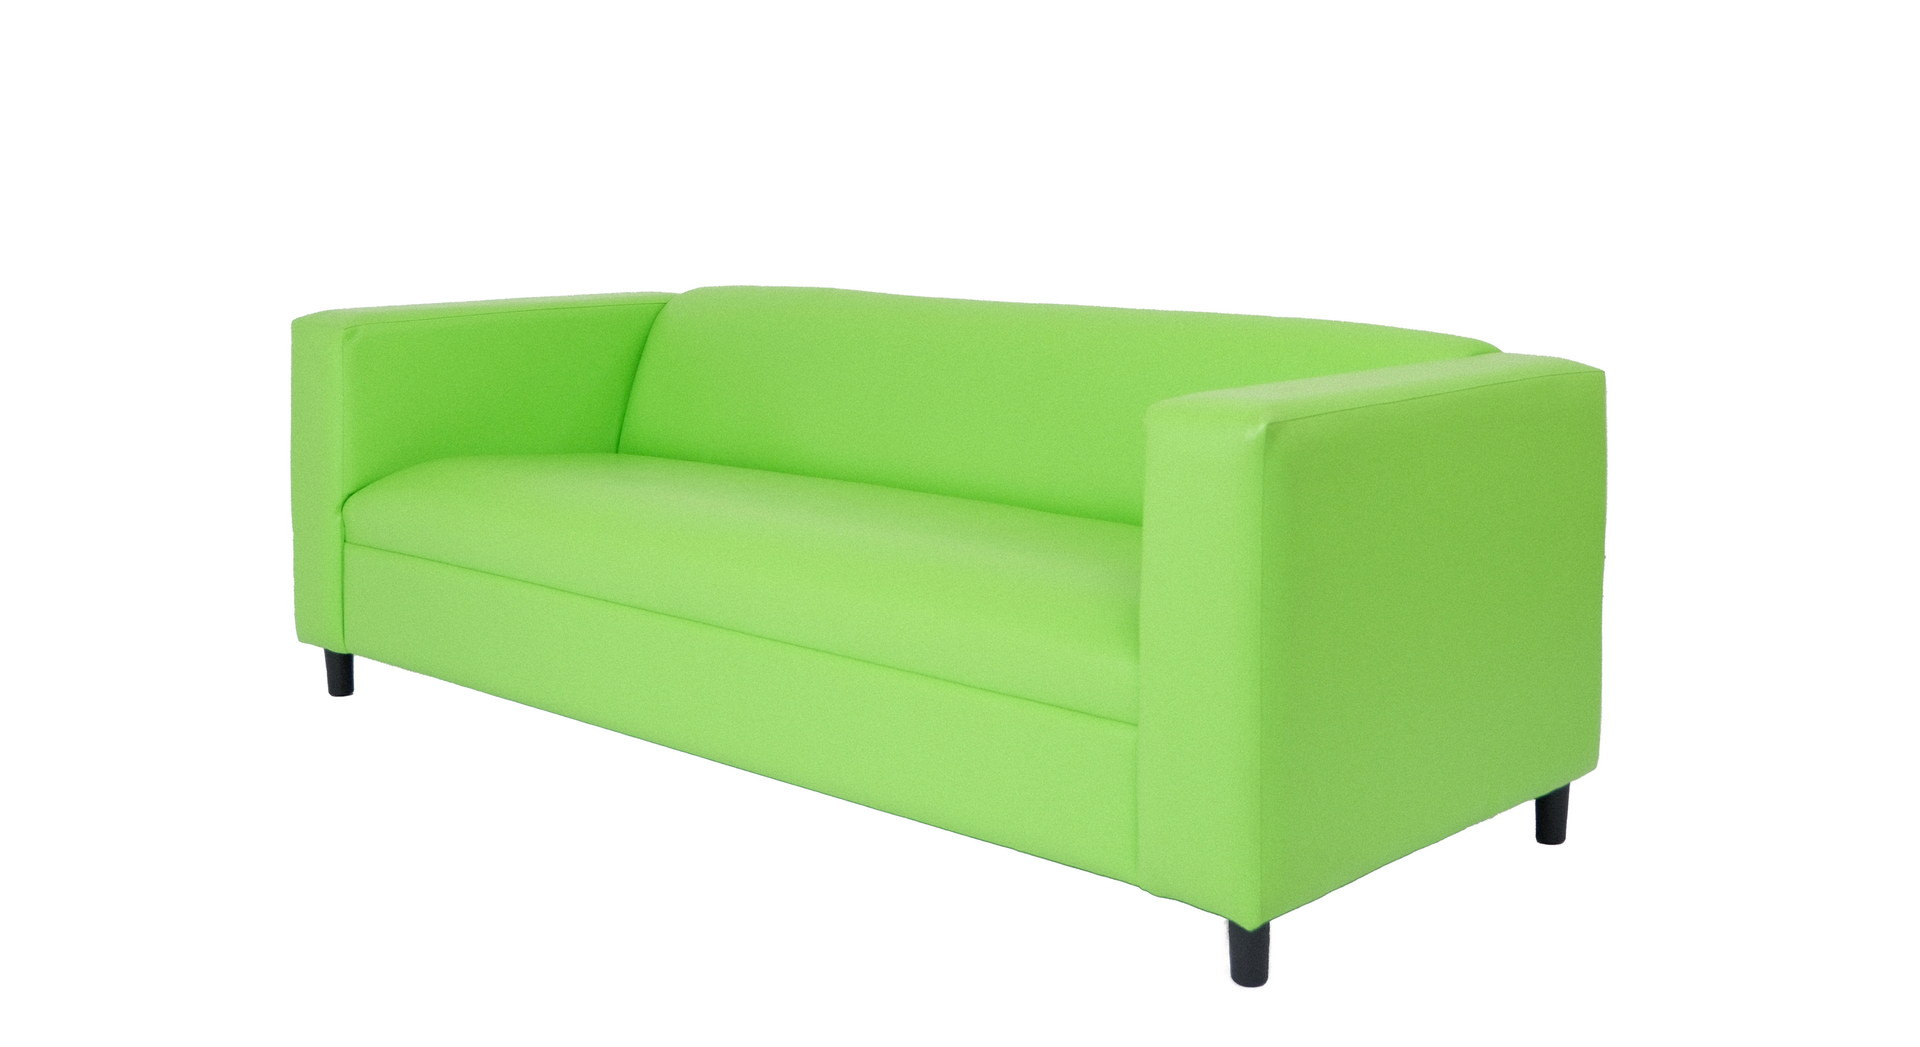 84" Green Faux Leather And Black Sofa-530486-1